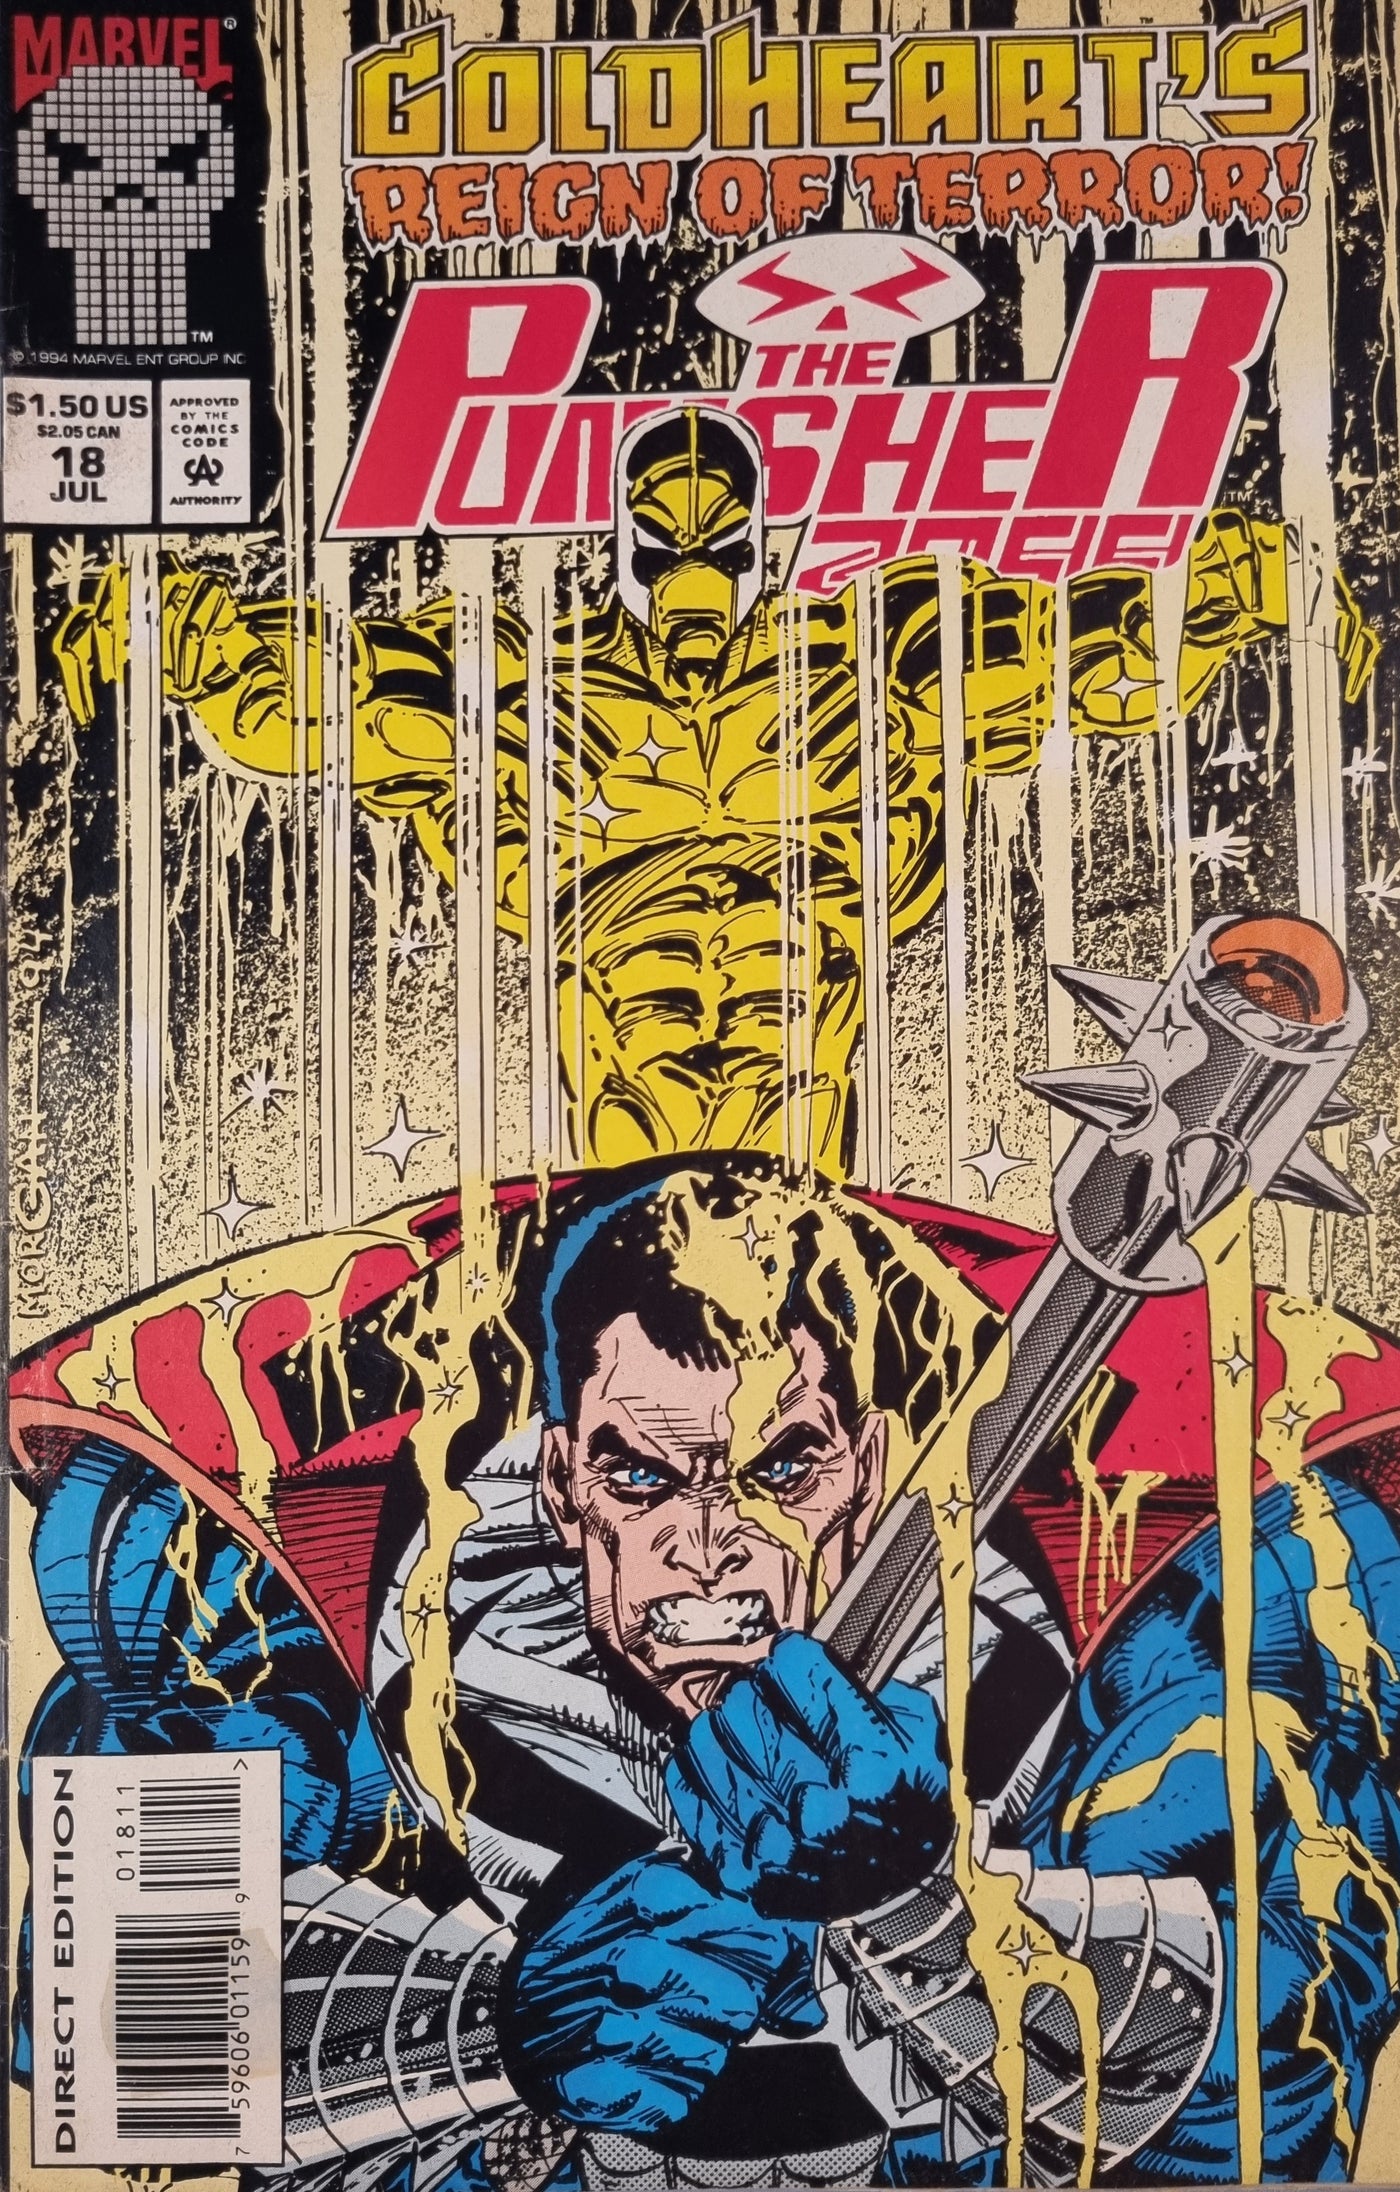 The Punisher 2099 #18